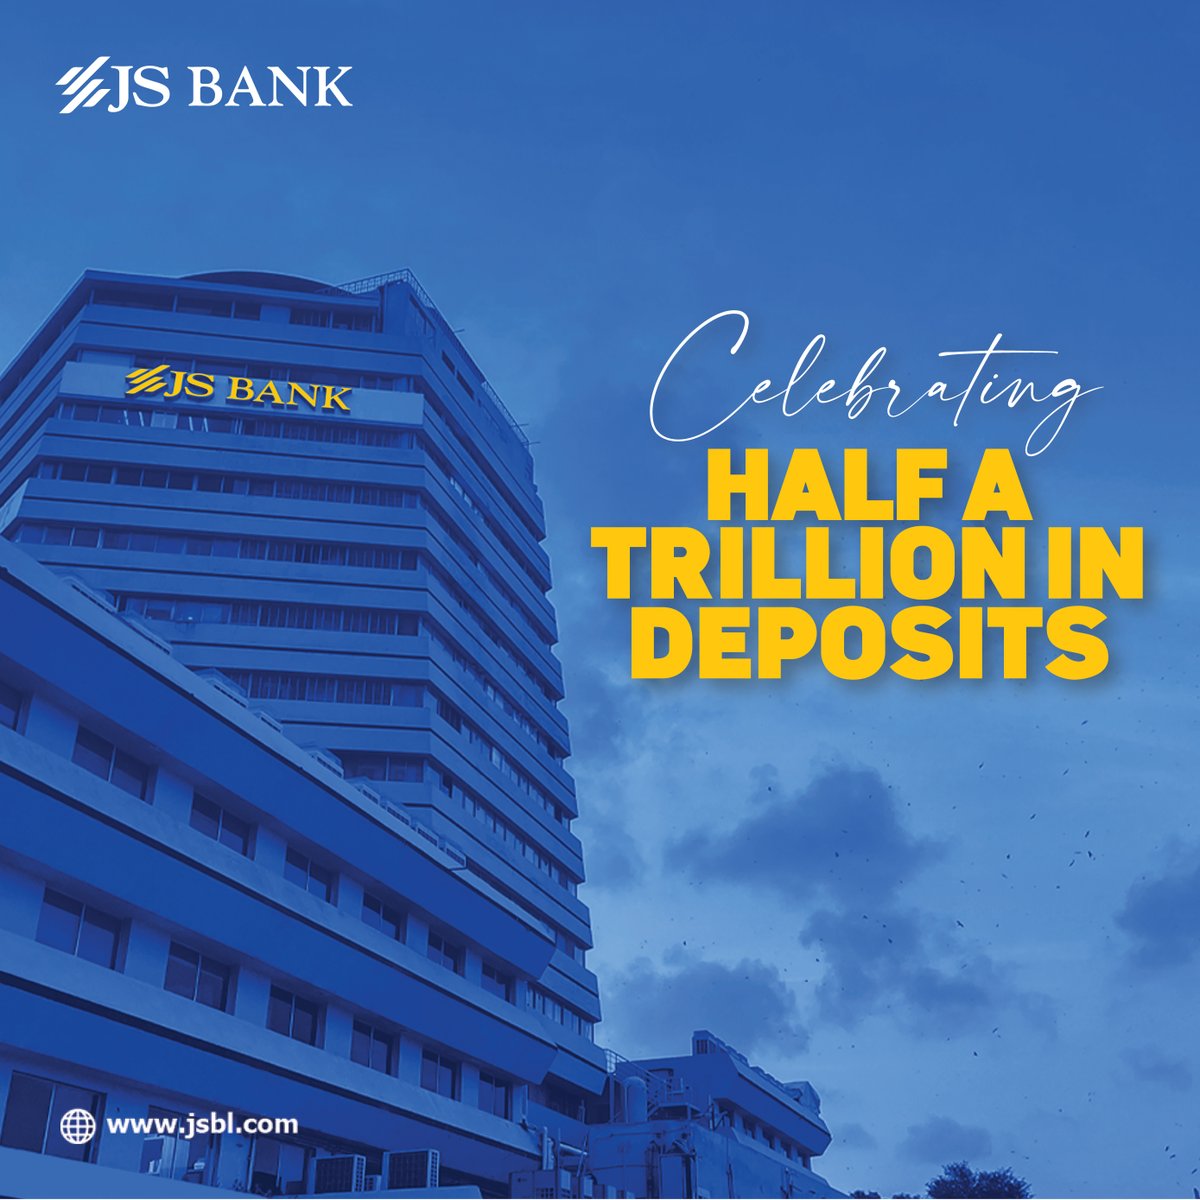 From Every Deposit to Half a Trillion! Thanks to the unwavering trust of our customers, the dedication of our employees, and the continued support of our stakeholders, we've reached this incredible milestone. #JSBank #BarhnaHaiAagey